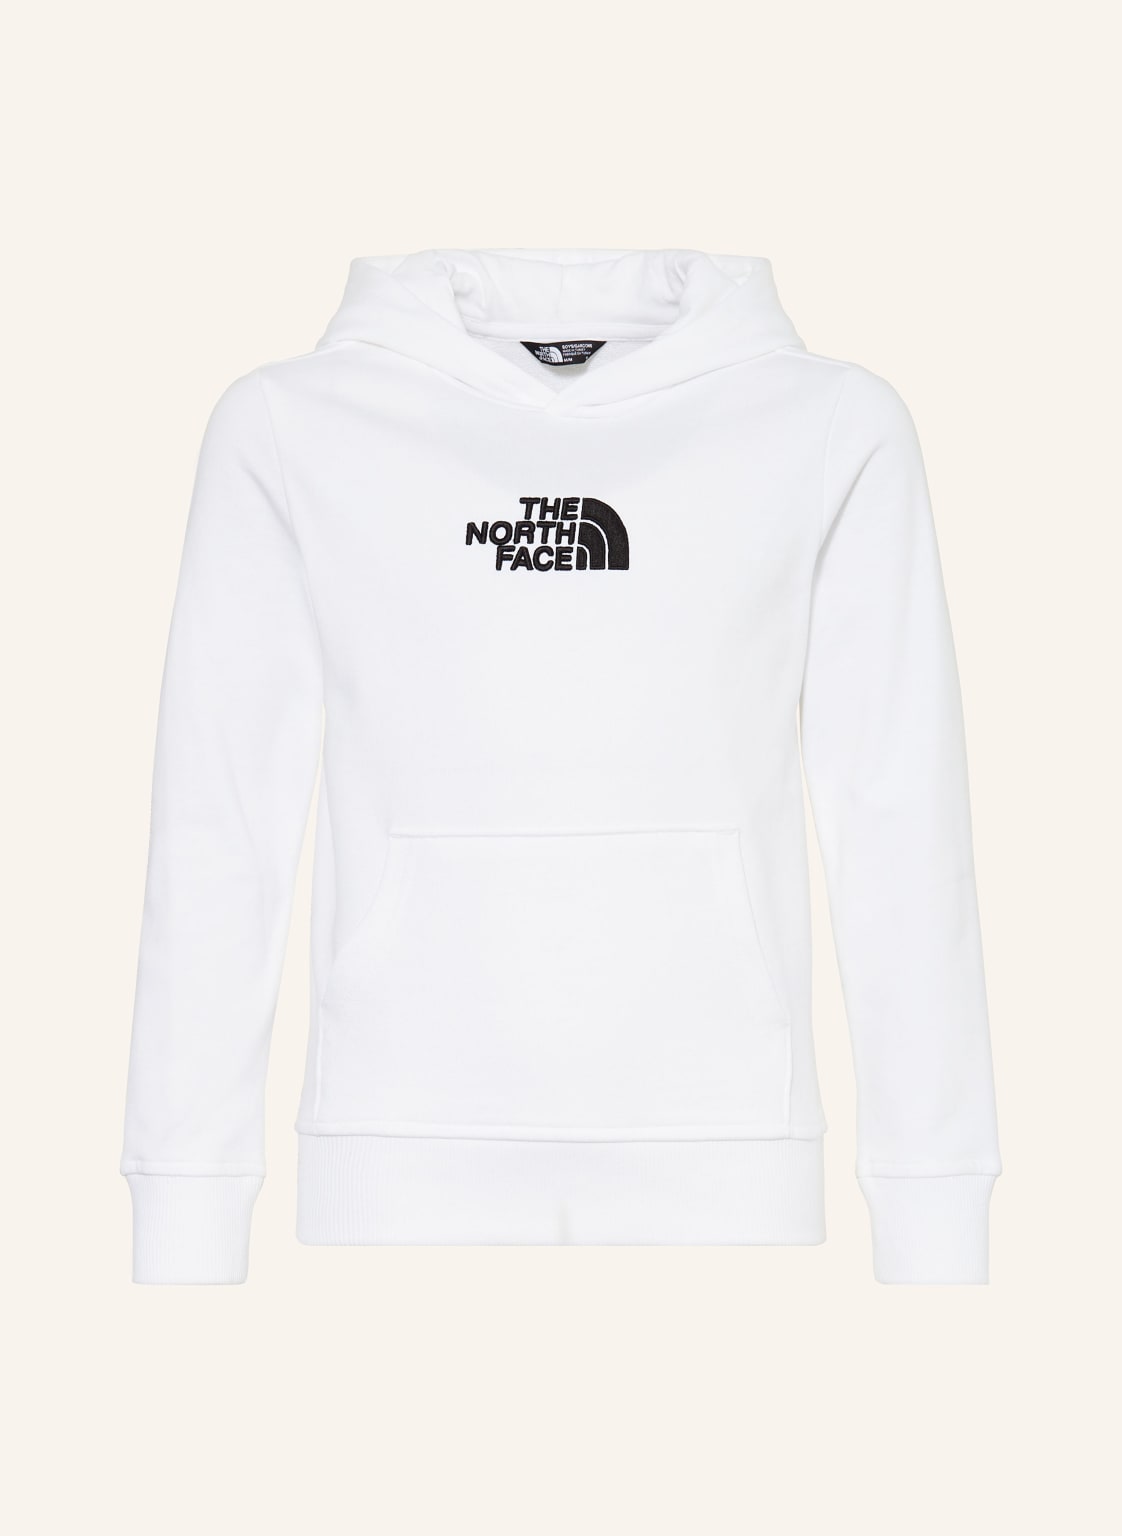 The North Face Hoodie weiss von The North Face